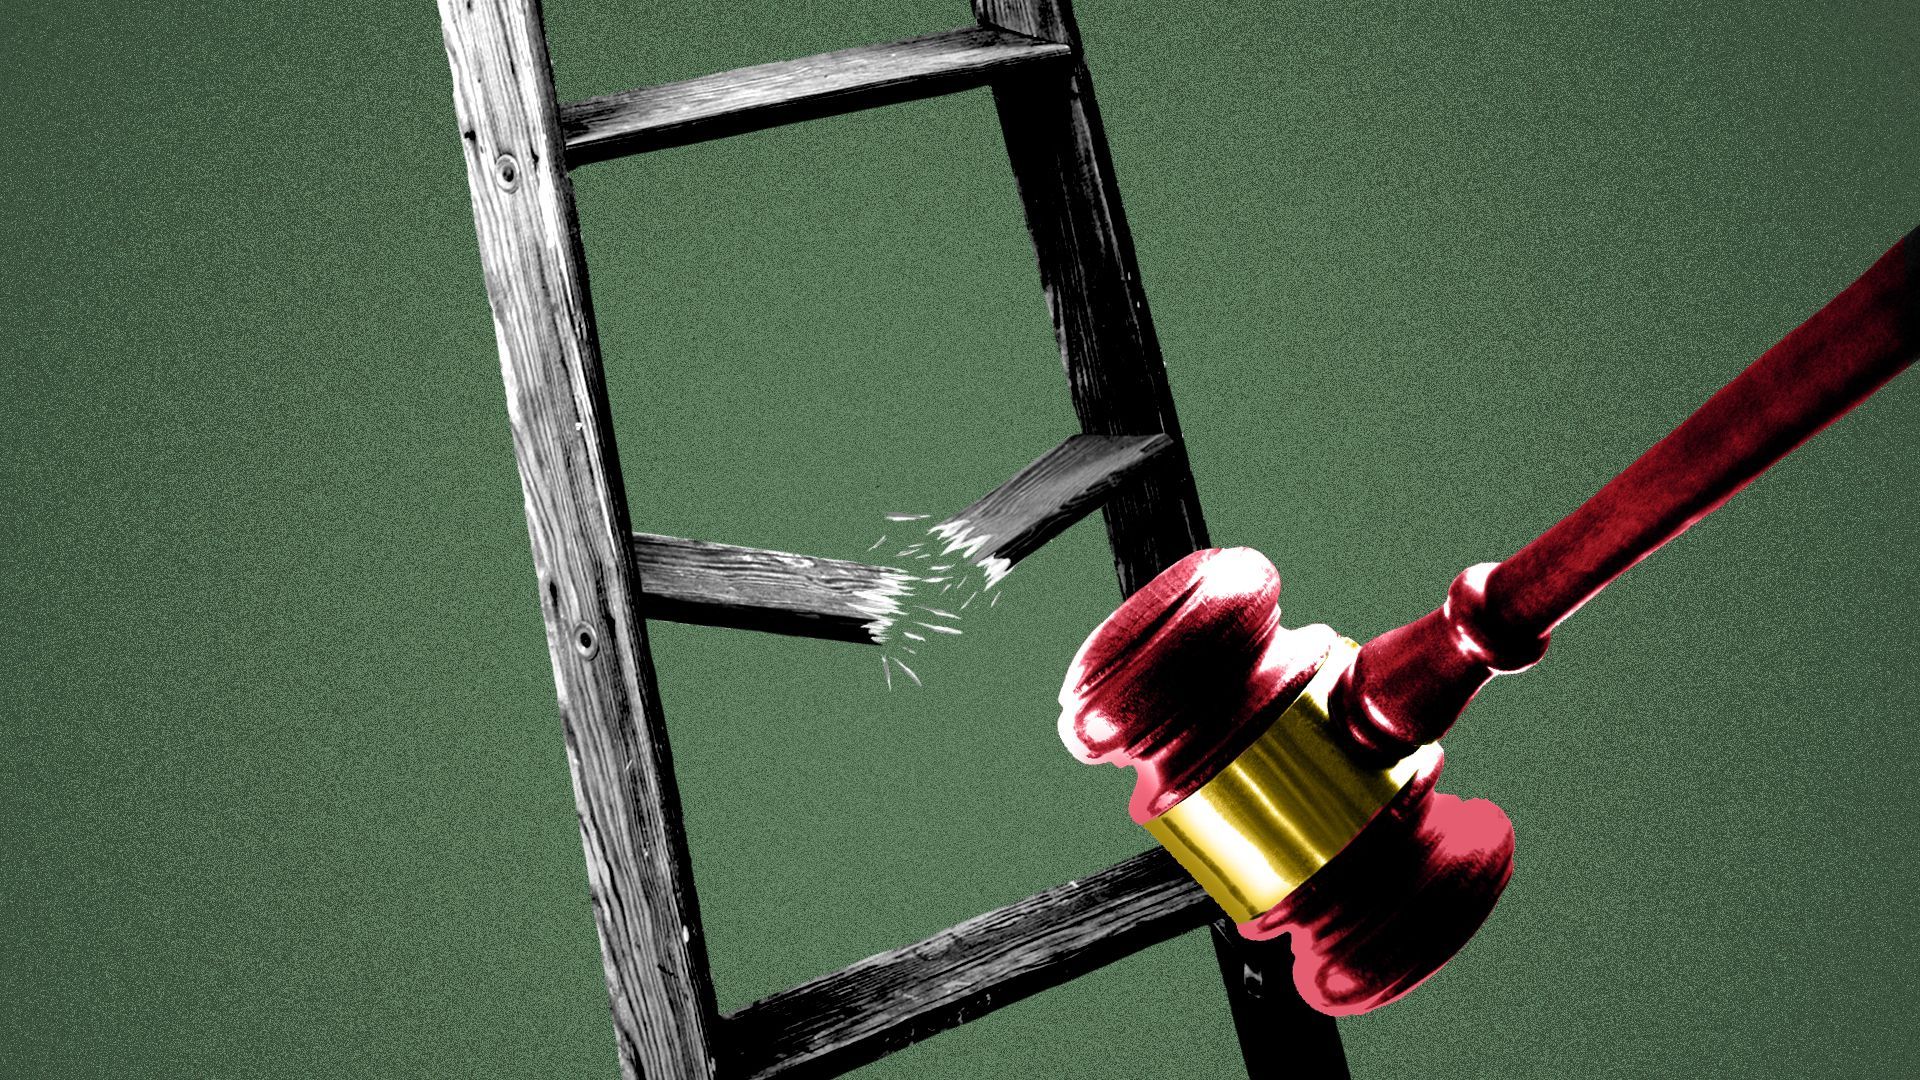 Illustration of gavel breaking one step in a wooden ladder.